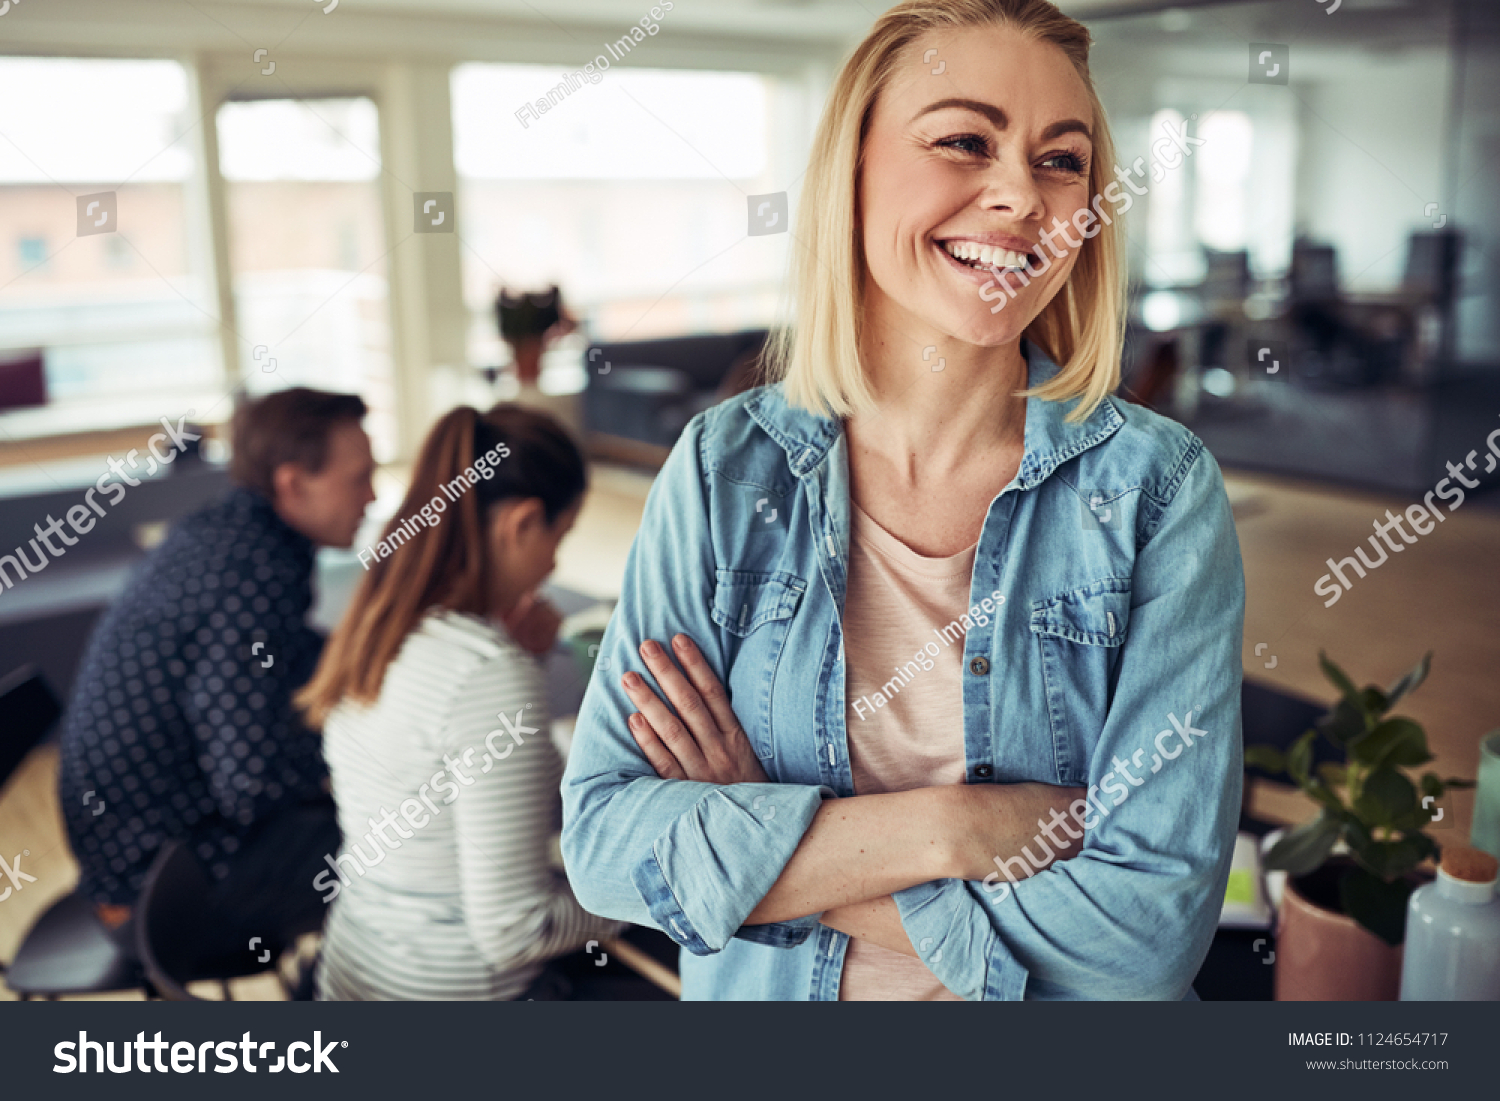 Laughing young businesswoman standing in an office with her arms crossed with coworkers sitting together at a table in the background #1124654717